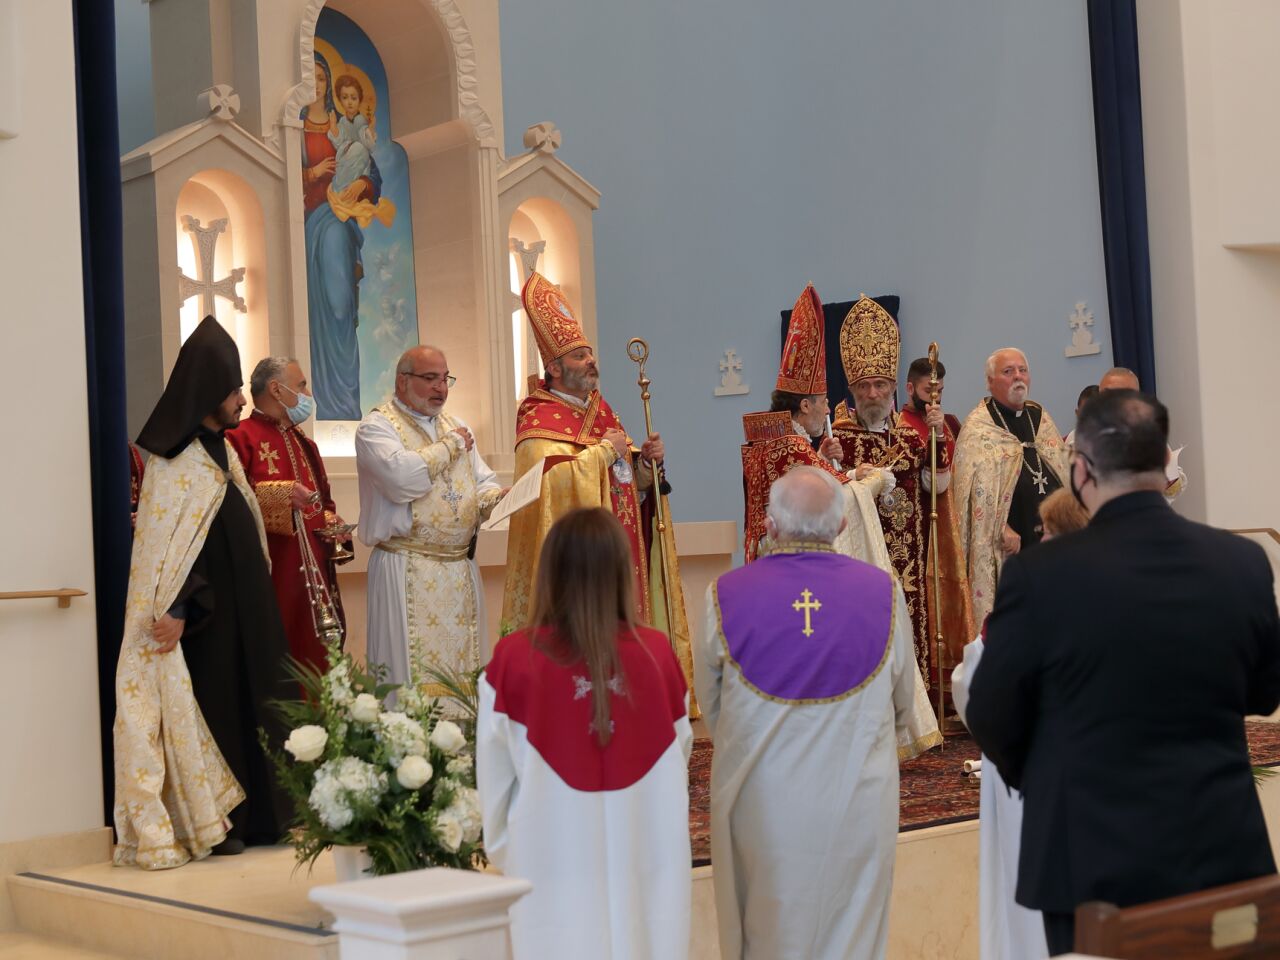 Father Pakrad Berejekian (Parish Priest, center left in white robe), Bishop Bagrat Galastanyan (Primate of the Diocese of Tavush, Armenia), Archbishop Hovnan Derderian (Primate, Western Diocese of Armenian Church), Archbishop Barkev Martirosyan (Former Primate of Artsakh, Armenia), and Father Moushegh Tashjian (Founding Pastor St. Mary Armenian Church, Costa Mesa) preside over the consecration and church naming ceremony at the new Armenian Church in San Diego